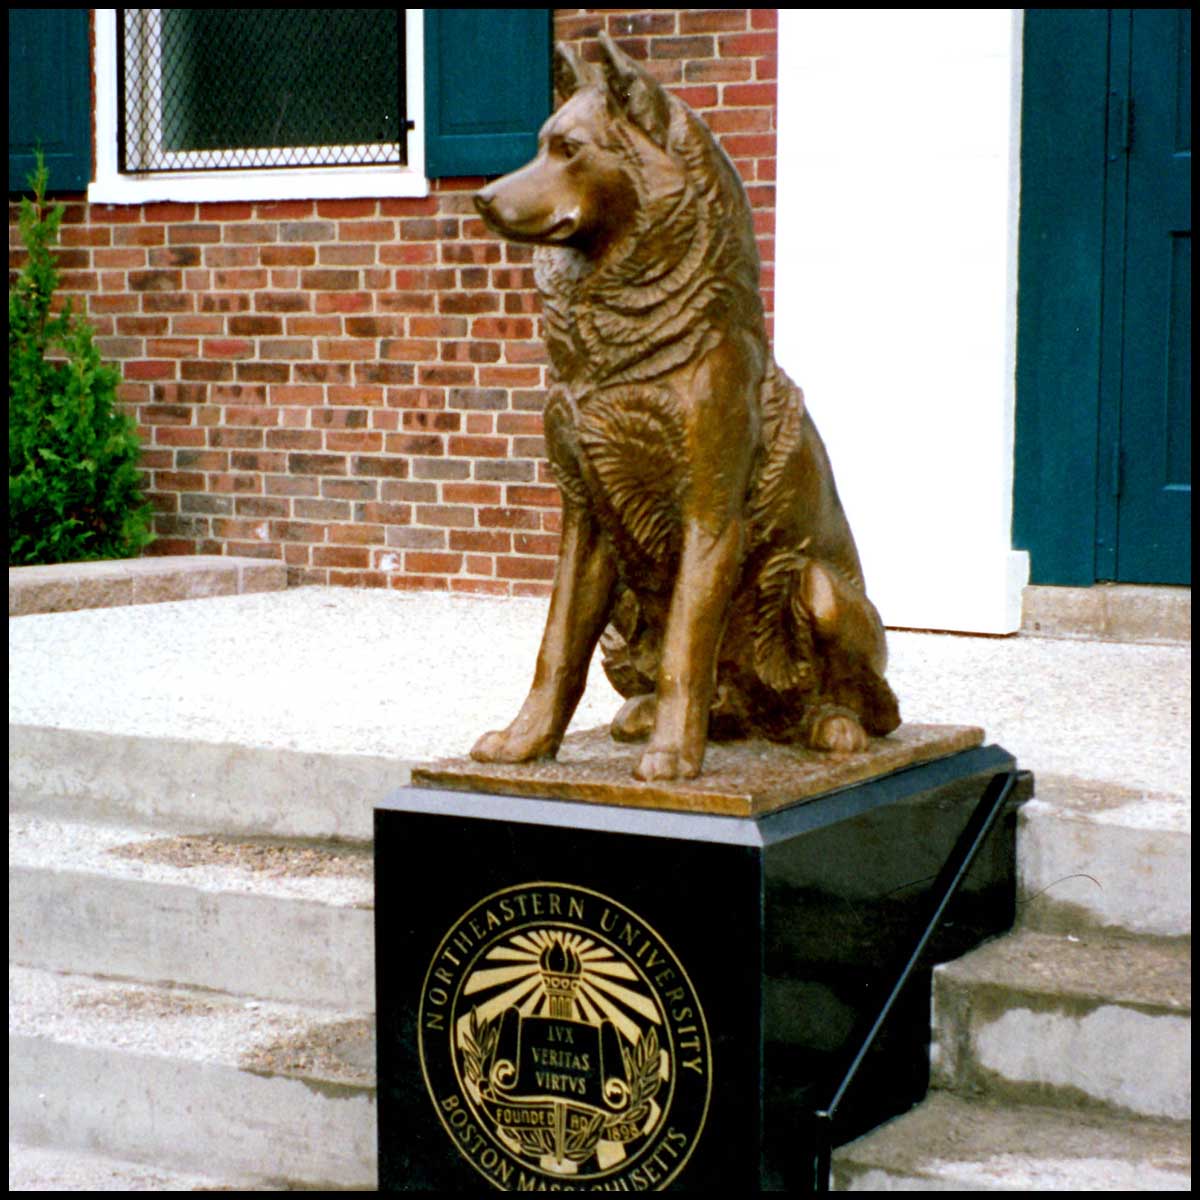 photo of bronze-colored sculpture of seated husky on black base with school logo on staircase